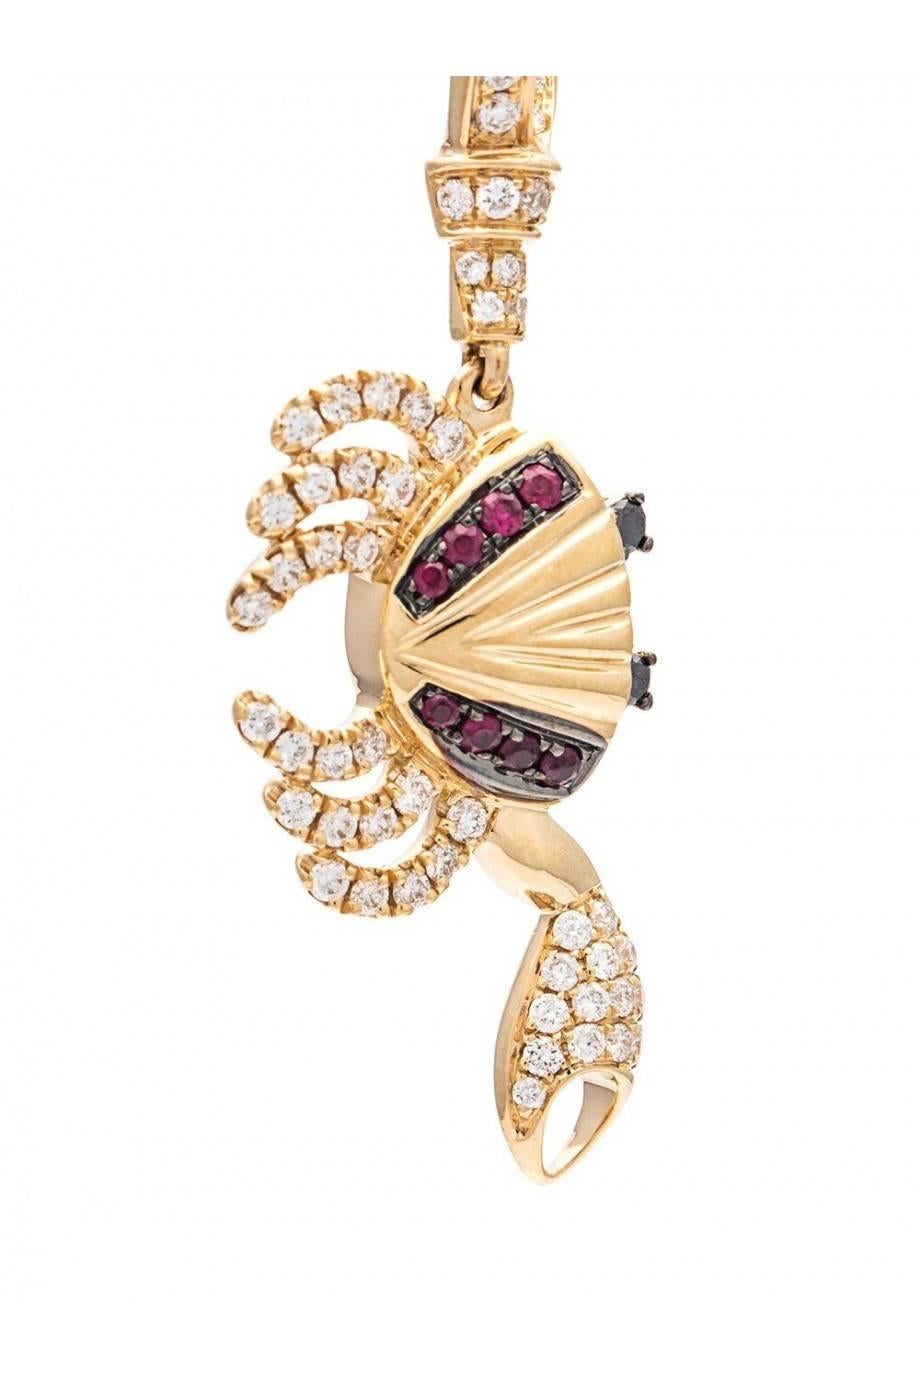 Earring in 18K Yellow Gold 5,2 gr
Diamonds 0,40 carats 
Ruby 0,10 carats 
Black Diamonds 0,04 carats 
Sold by Unit
Alpa System
